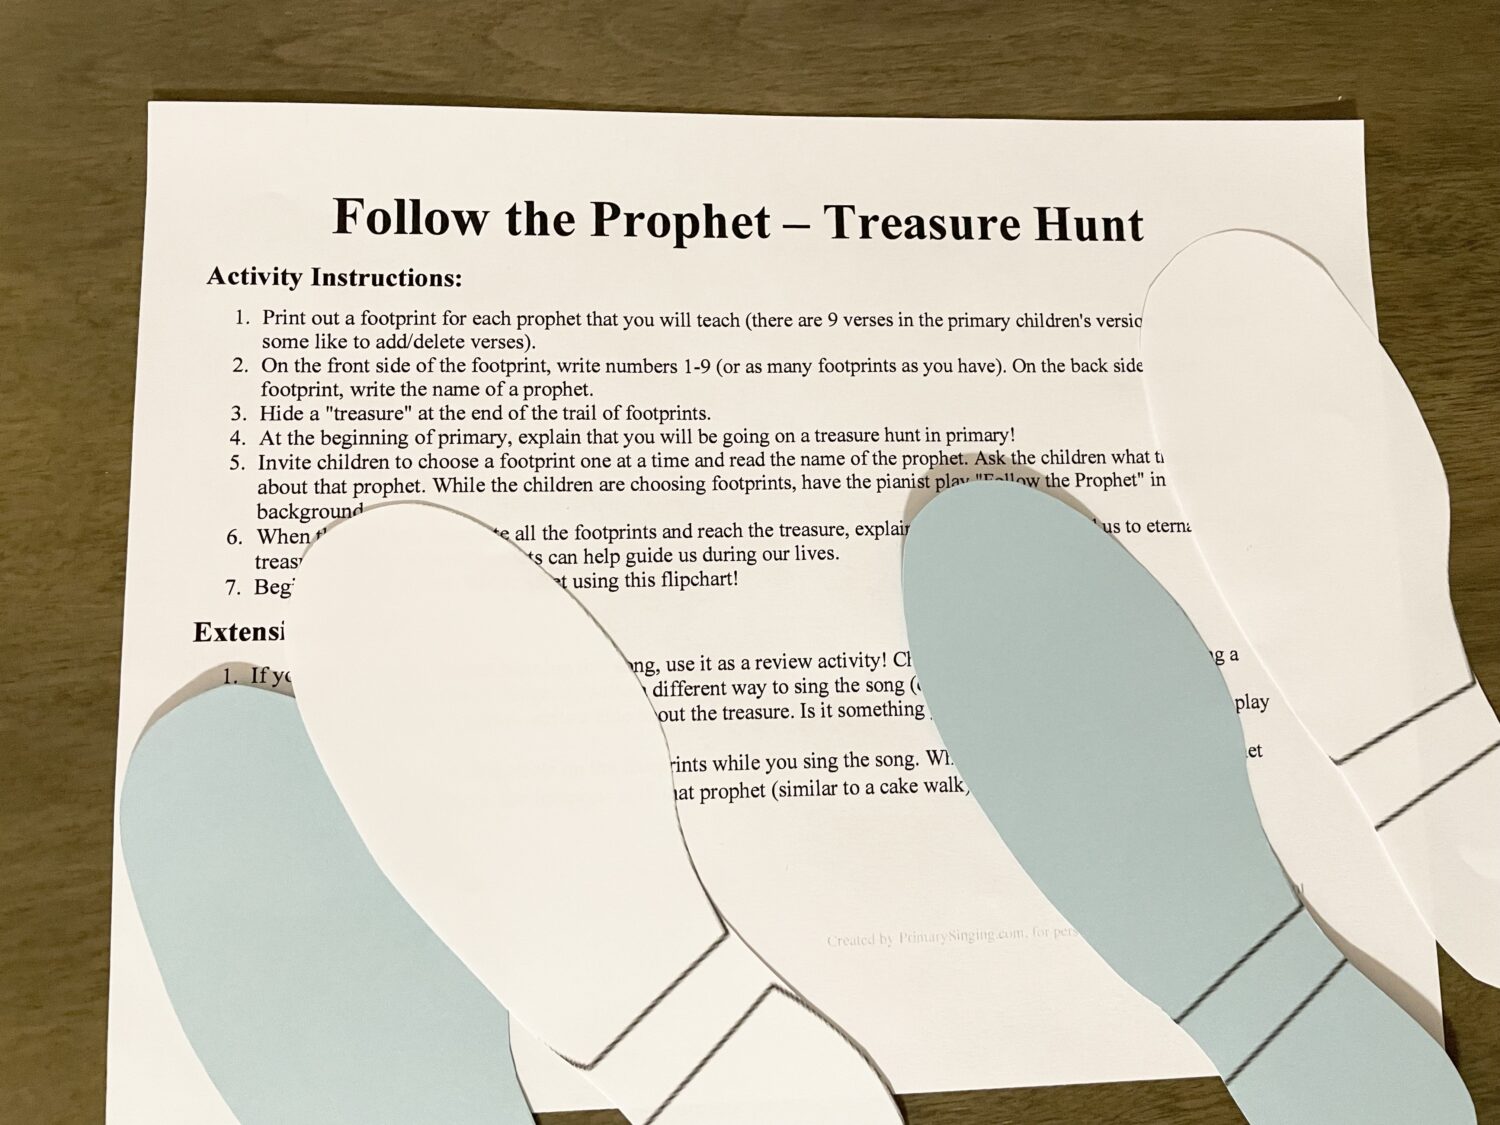 Follow the Prophet Treasure Hunt Easy singing time ideas for Primary Music Leaders IMG 6100 e1645738841846